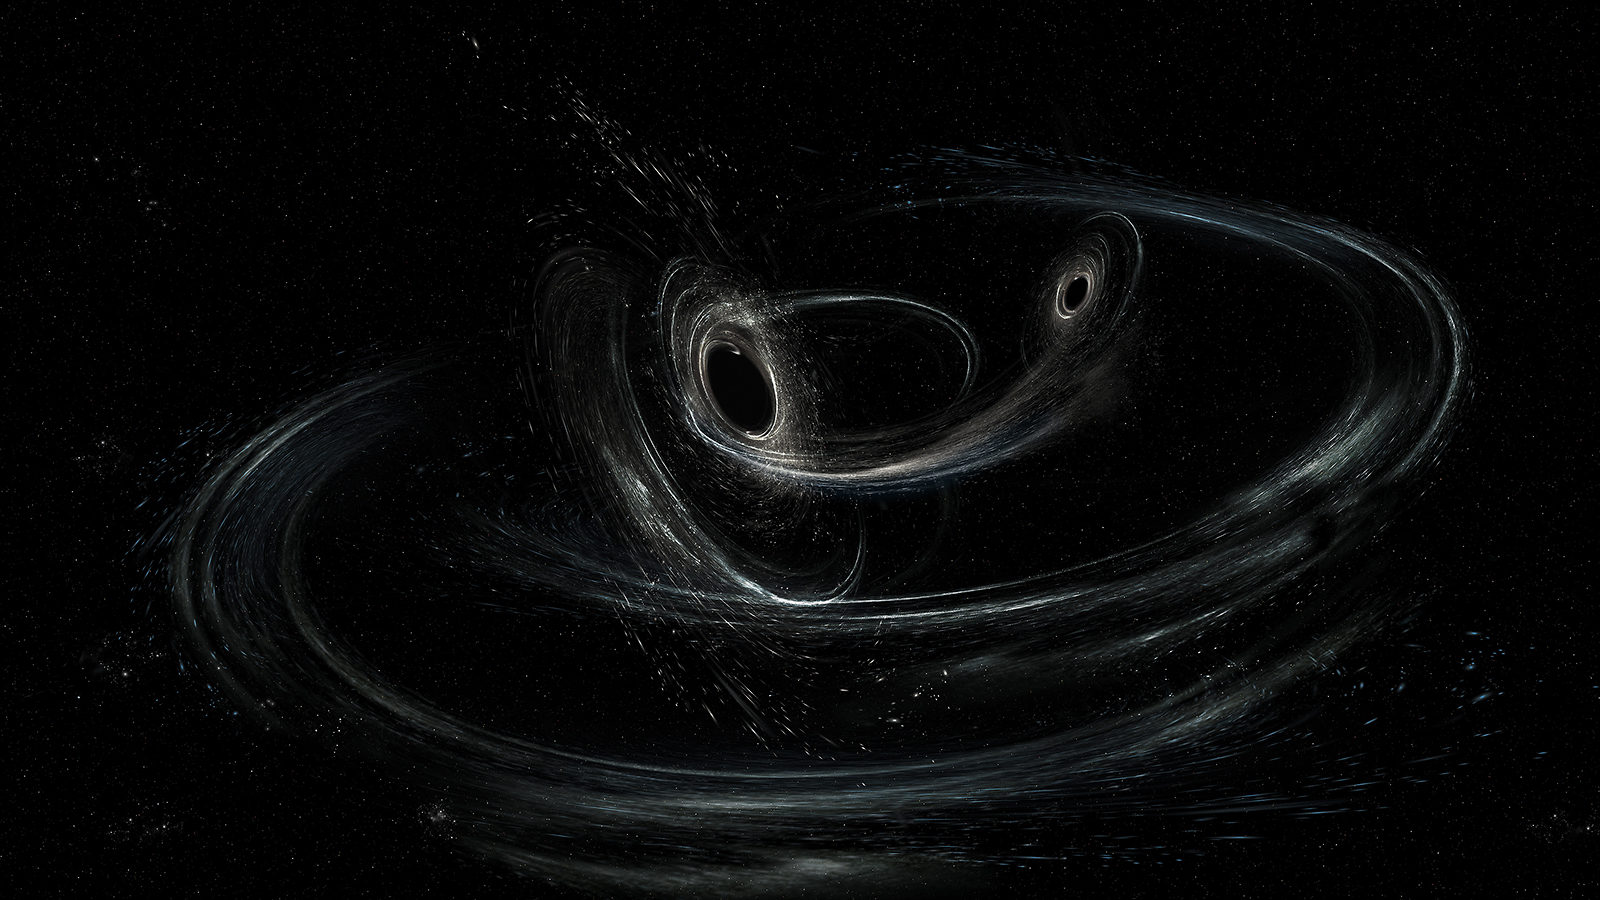 Artist's conception shows two merging black holes similar to those detected by LIGO